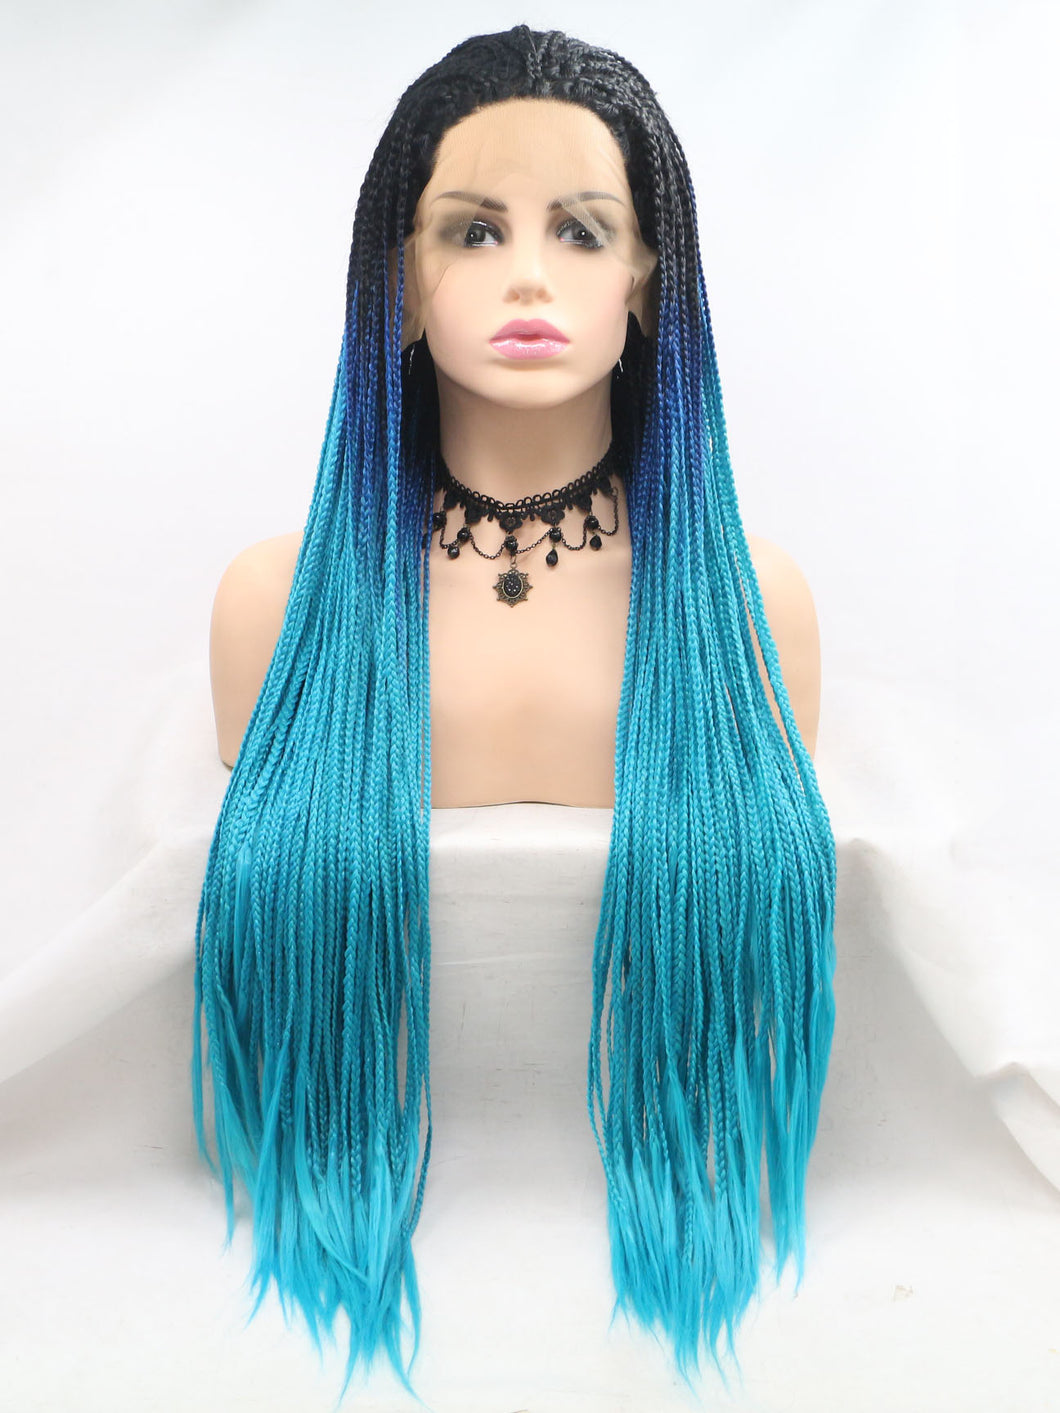 Rooted Gradient Blue Braided Lace Front Wig